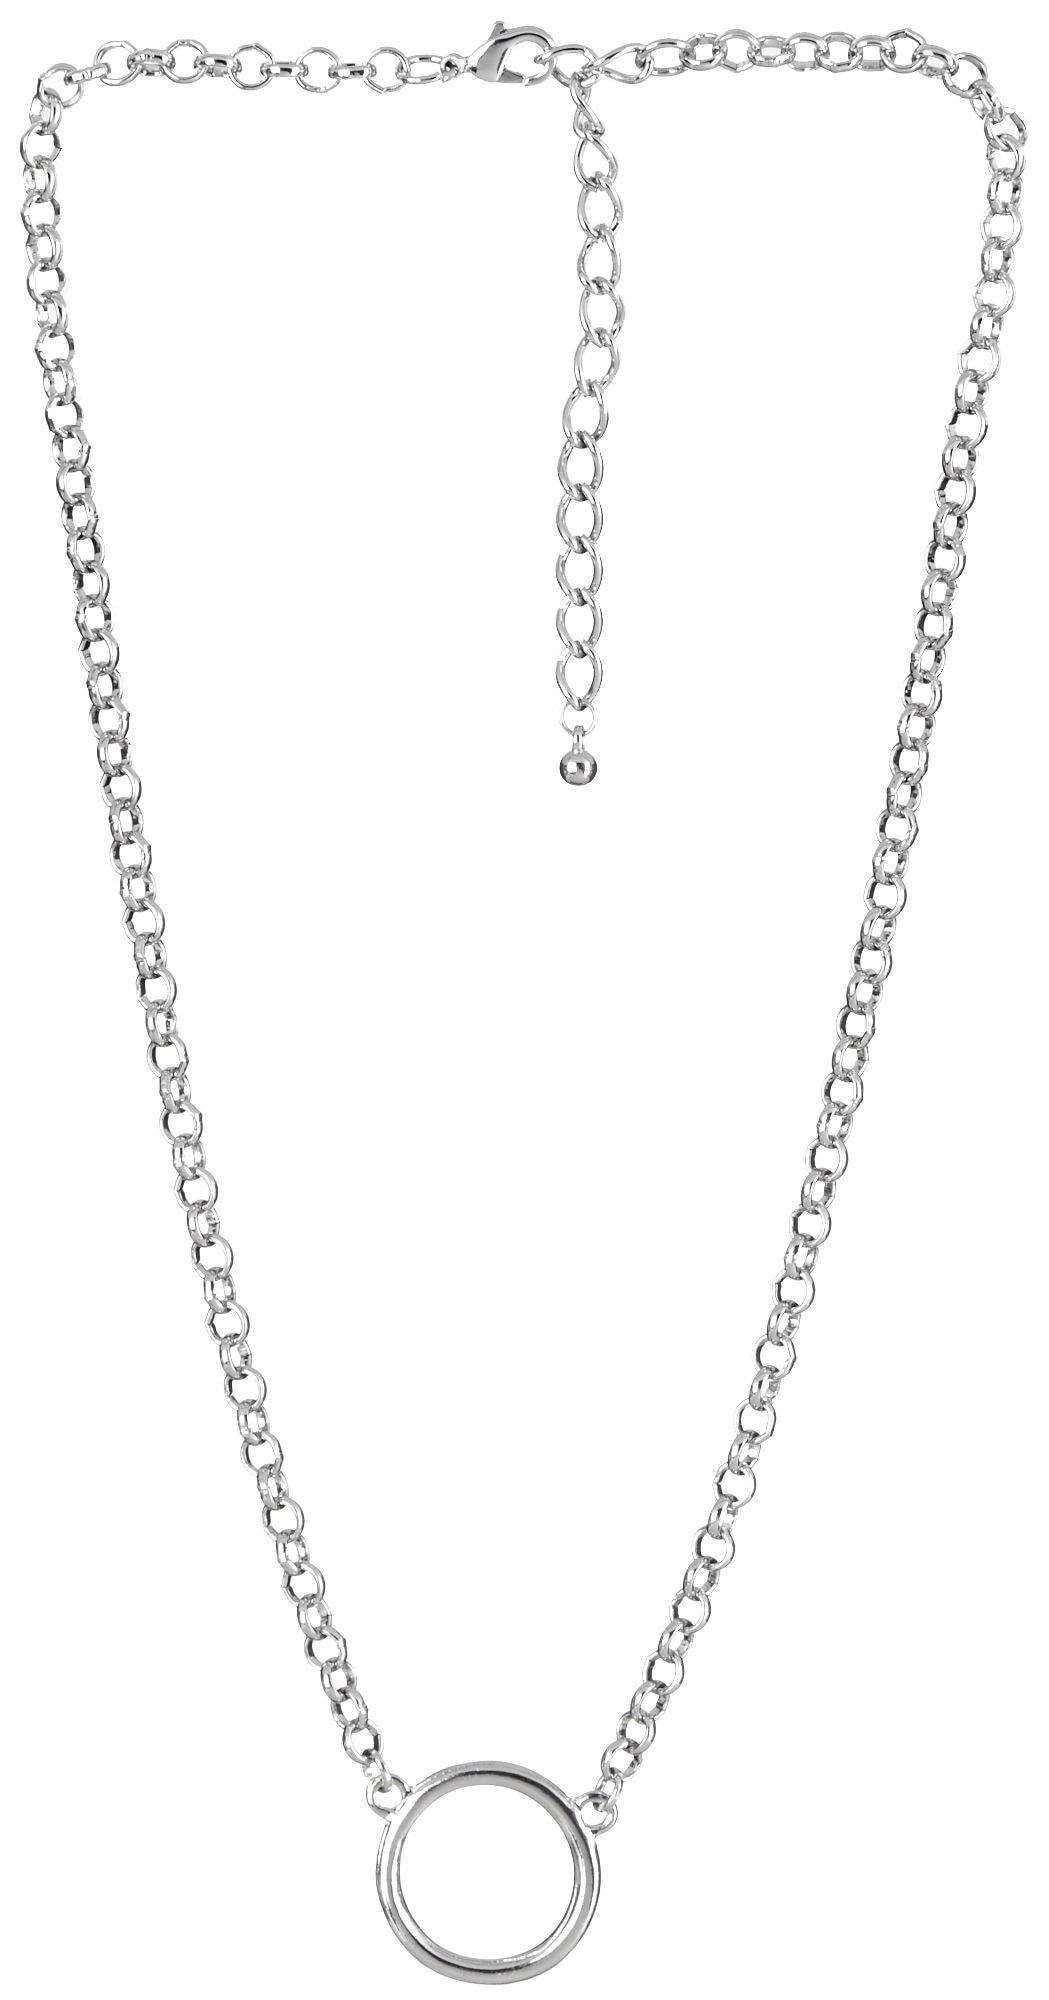 By Roman Silver Tone Chain Necklace